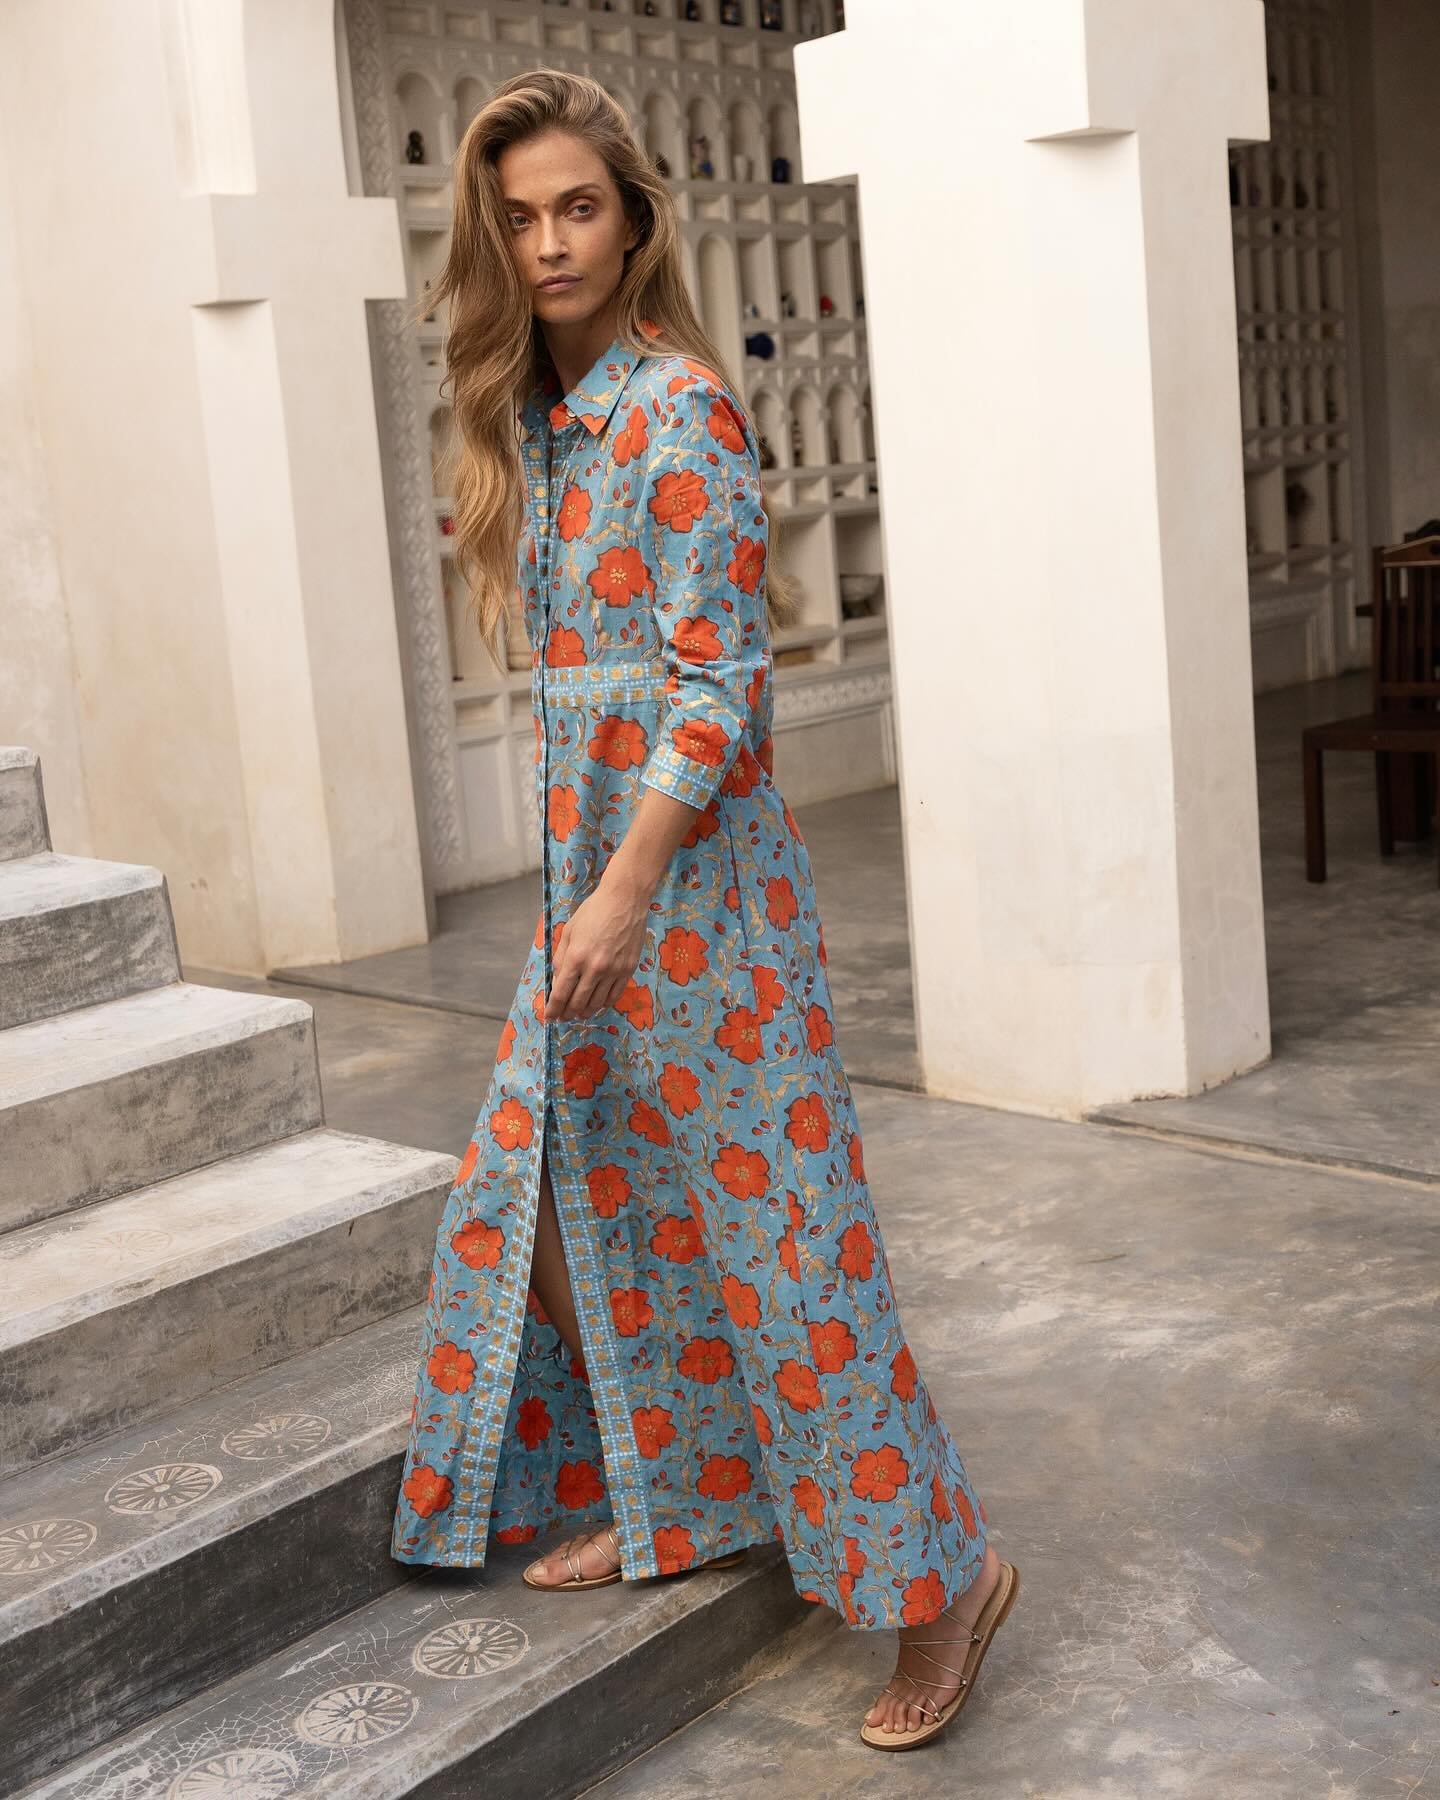 Effortlessly polished, bold pattern play and the most flattering of silhouettes, @oliphantdesign&rsquo;s new arrivals are everything you&rsquo;re looking for in a summer wardrobe. These playful designs are true works of art. Shop now on OliphantDesig